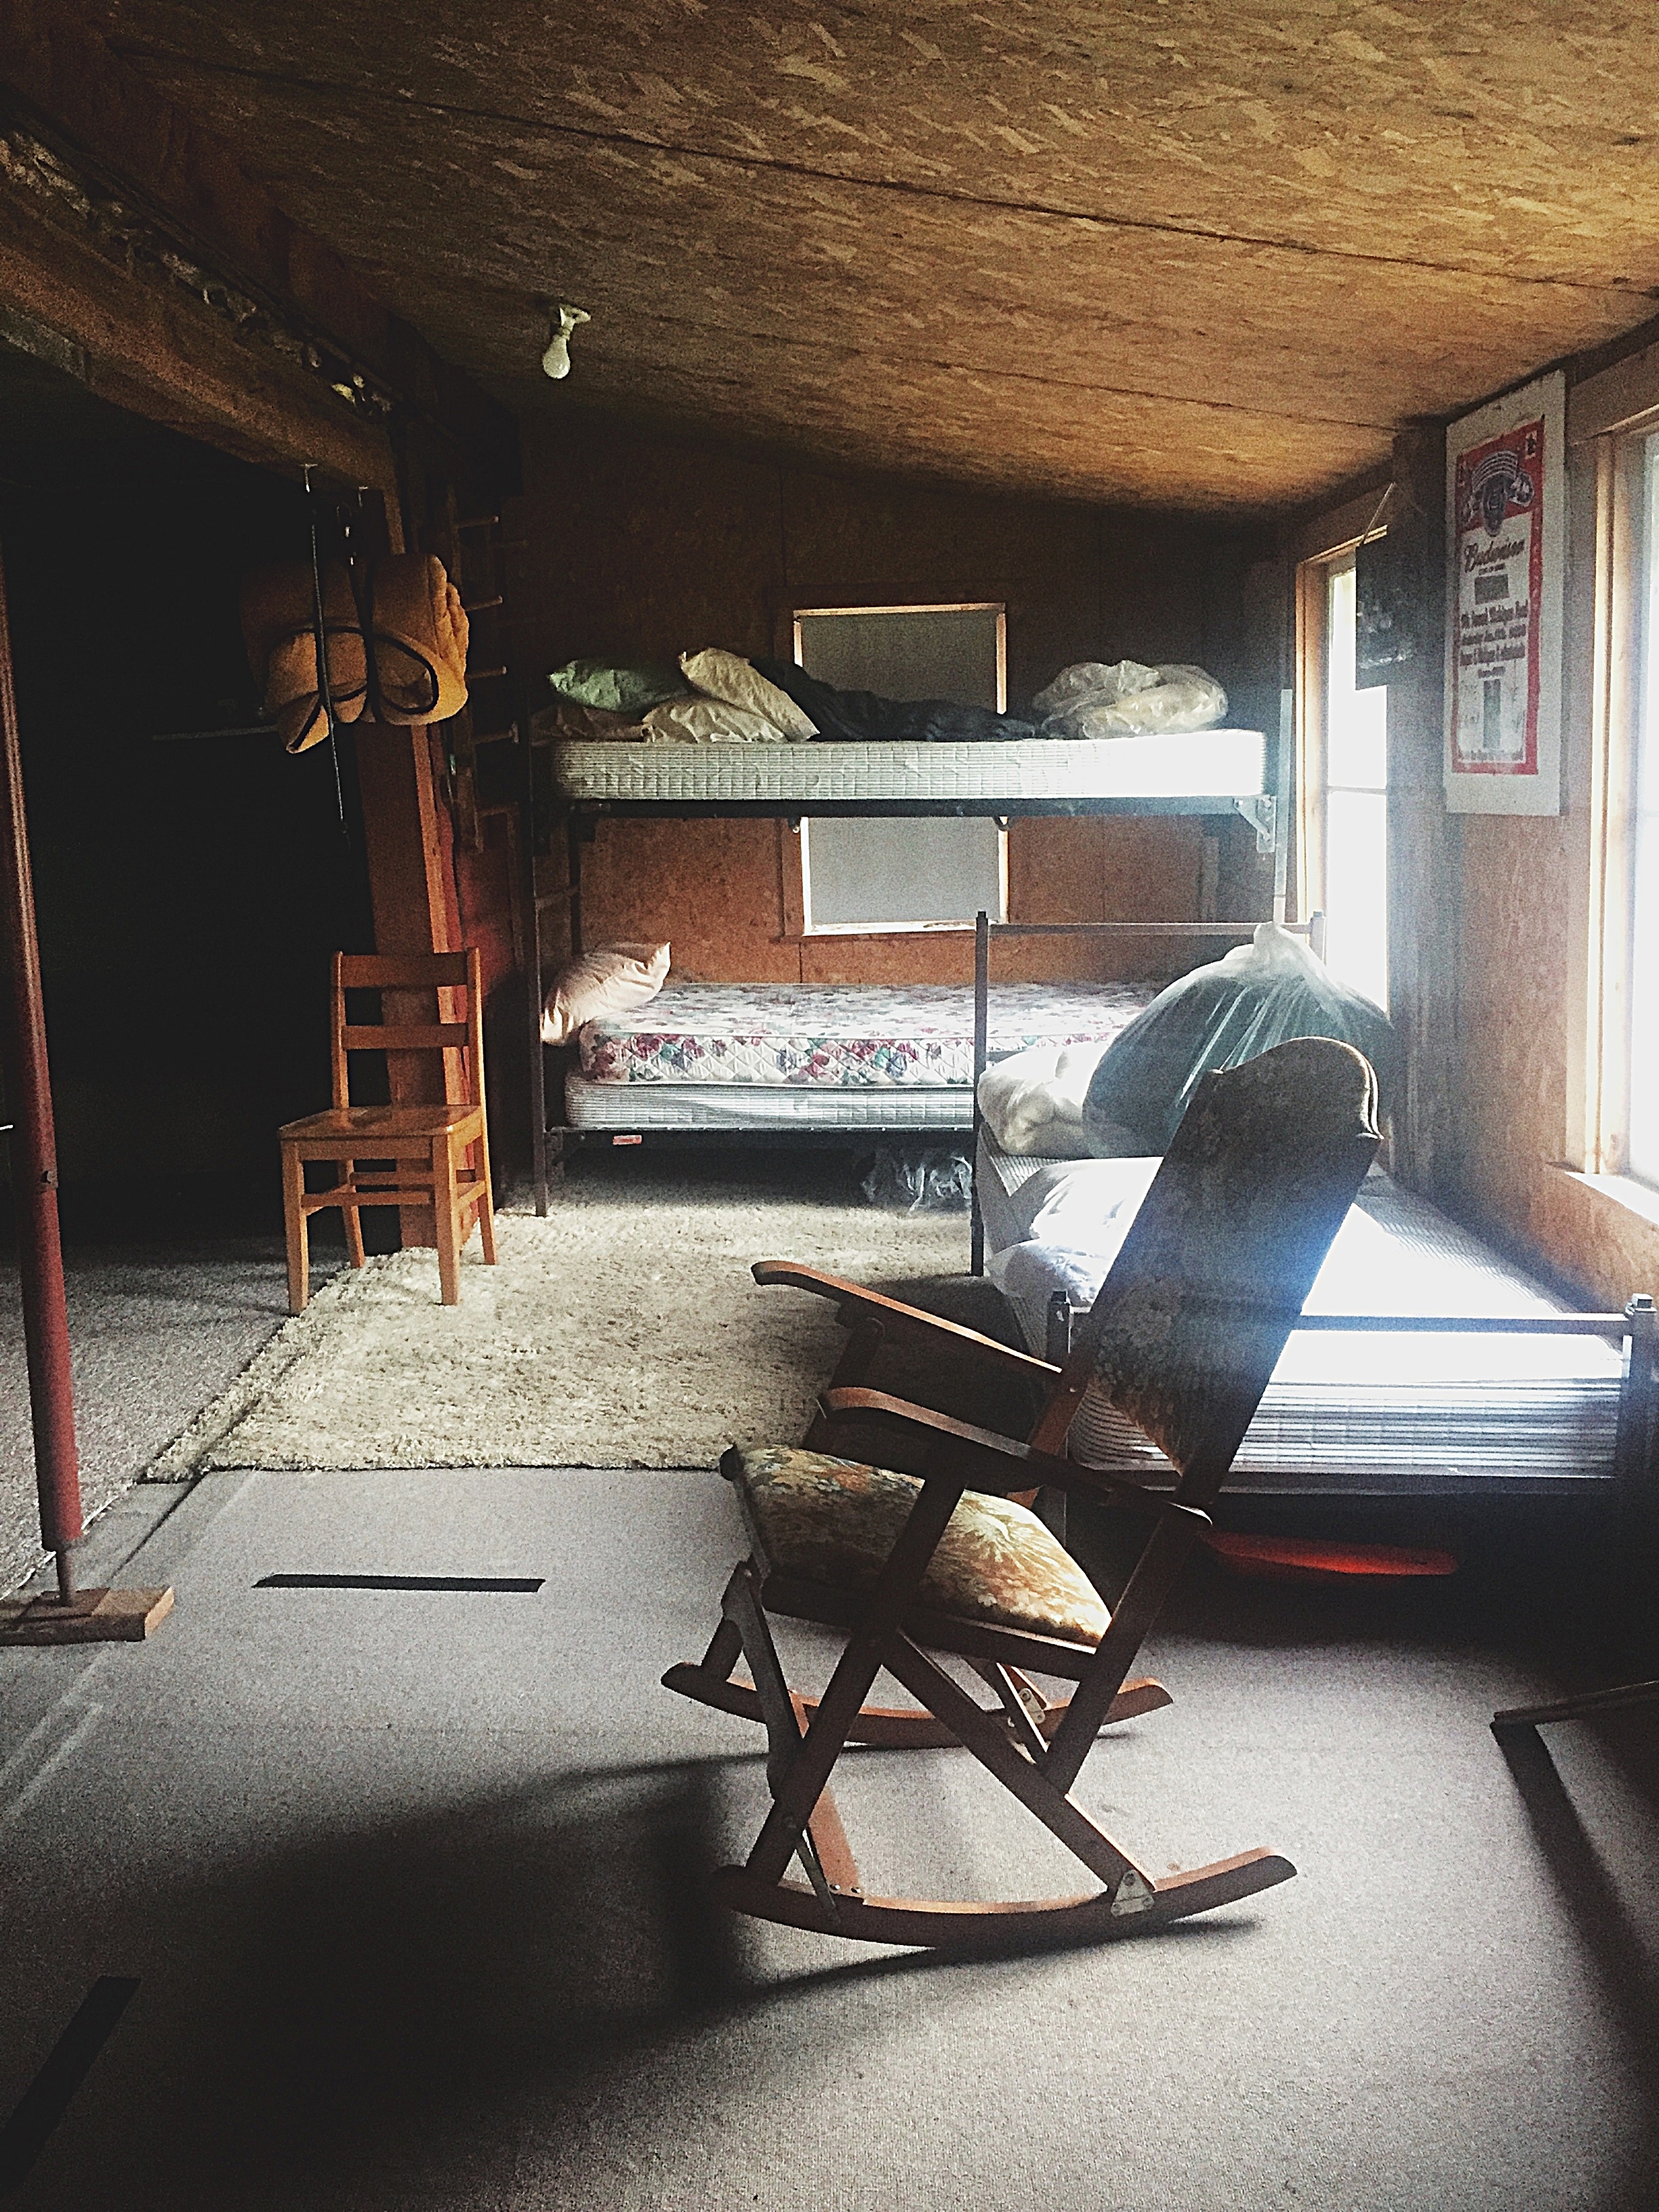  An inside-look of the Doll House in Owls Head, N.Y., one of the many cabins David Sweat and Richard Matt raided while on the run.  (Chelsia Rose Marcius/Oct. 16, 2016)  